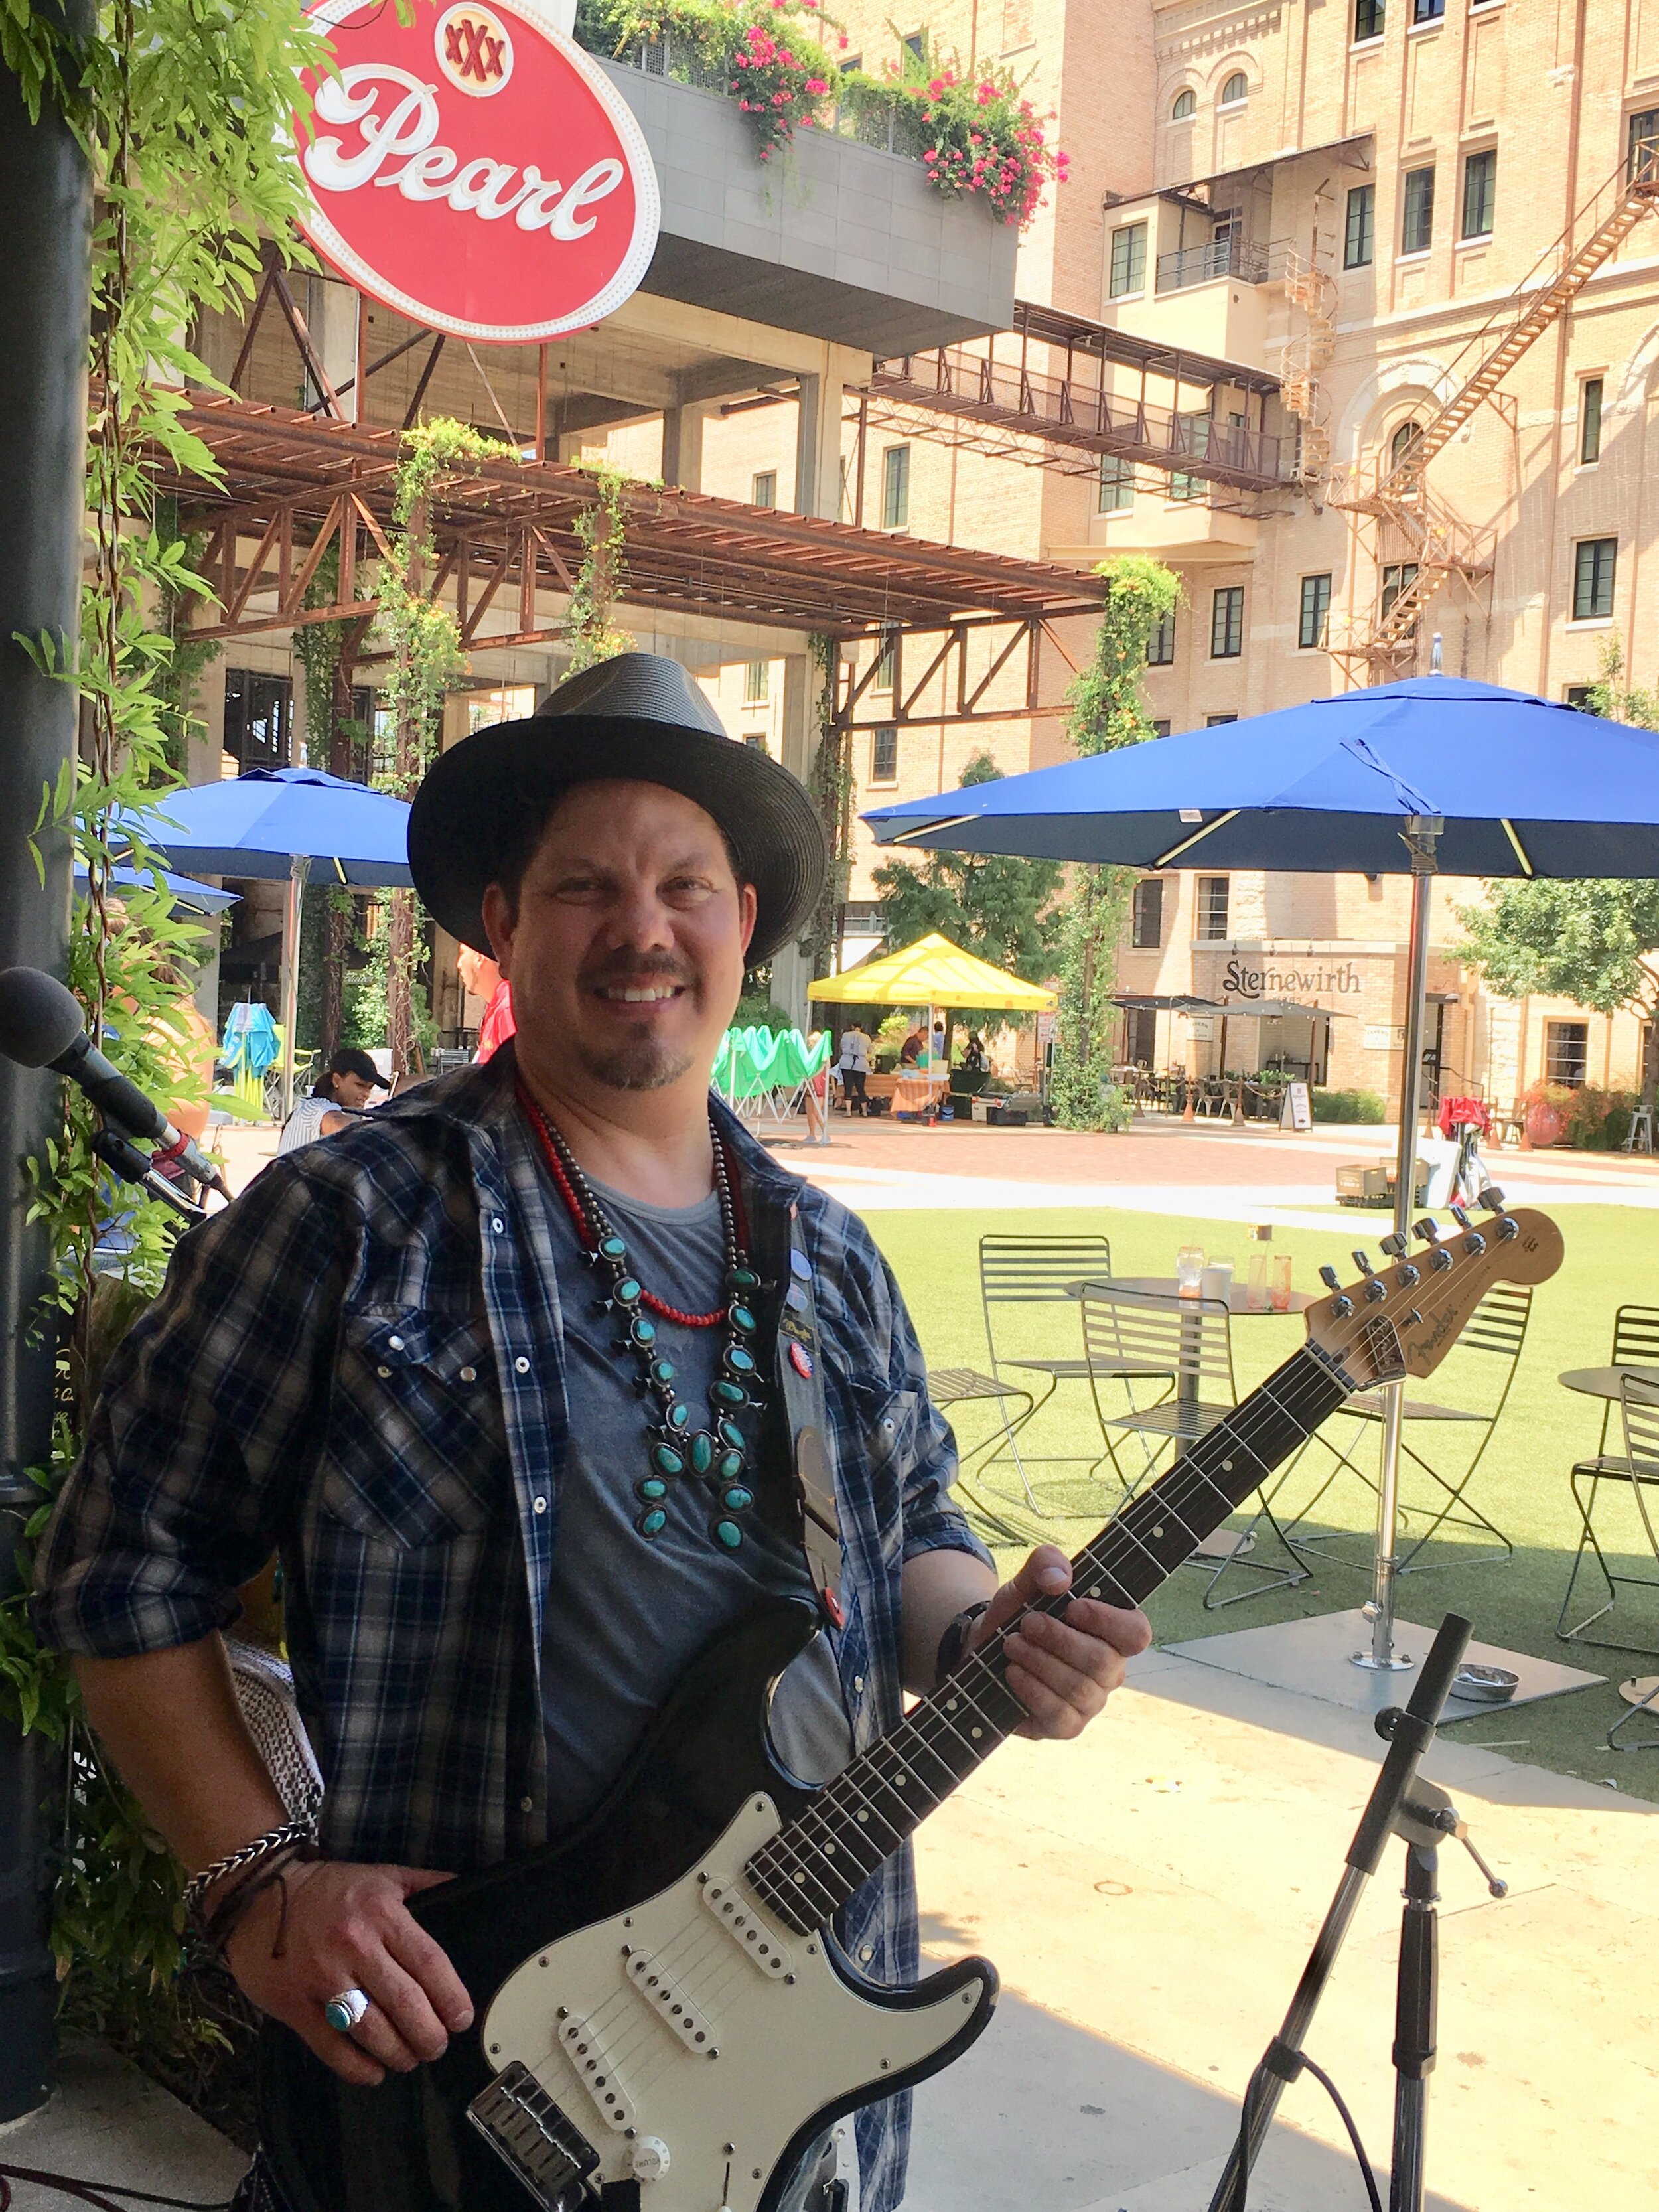 Anthony Garza KWSR plays The Pearl Brewery Farmers Market 2019